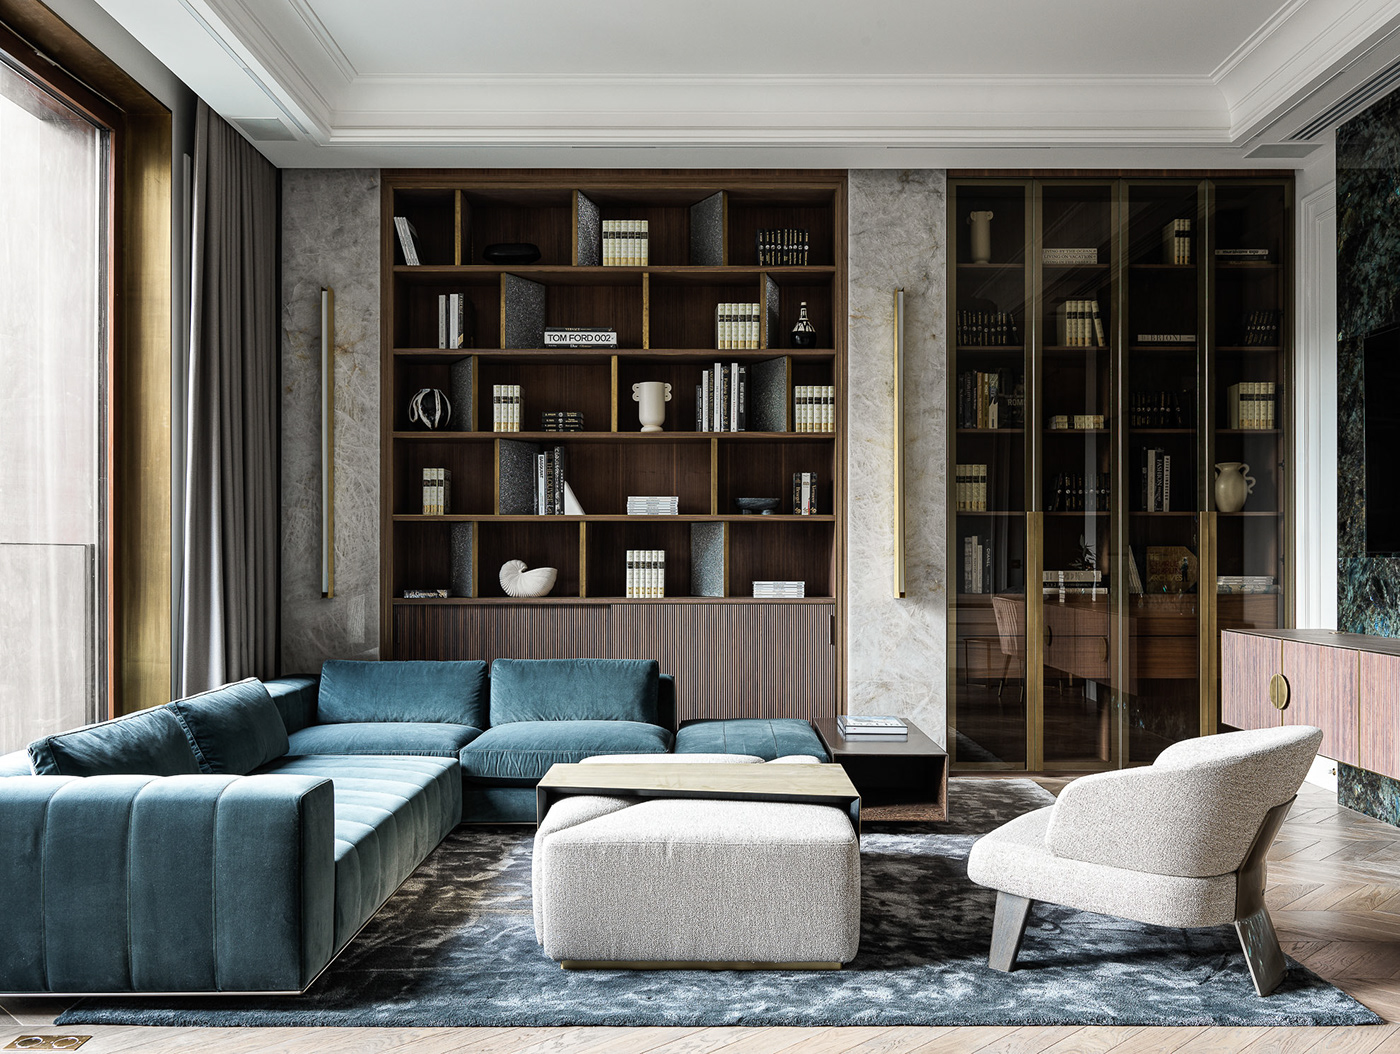 Chic, luxury living area with teal sofa and stylish bookshelves in wood and quartzite stone